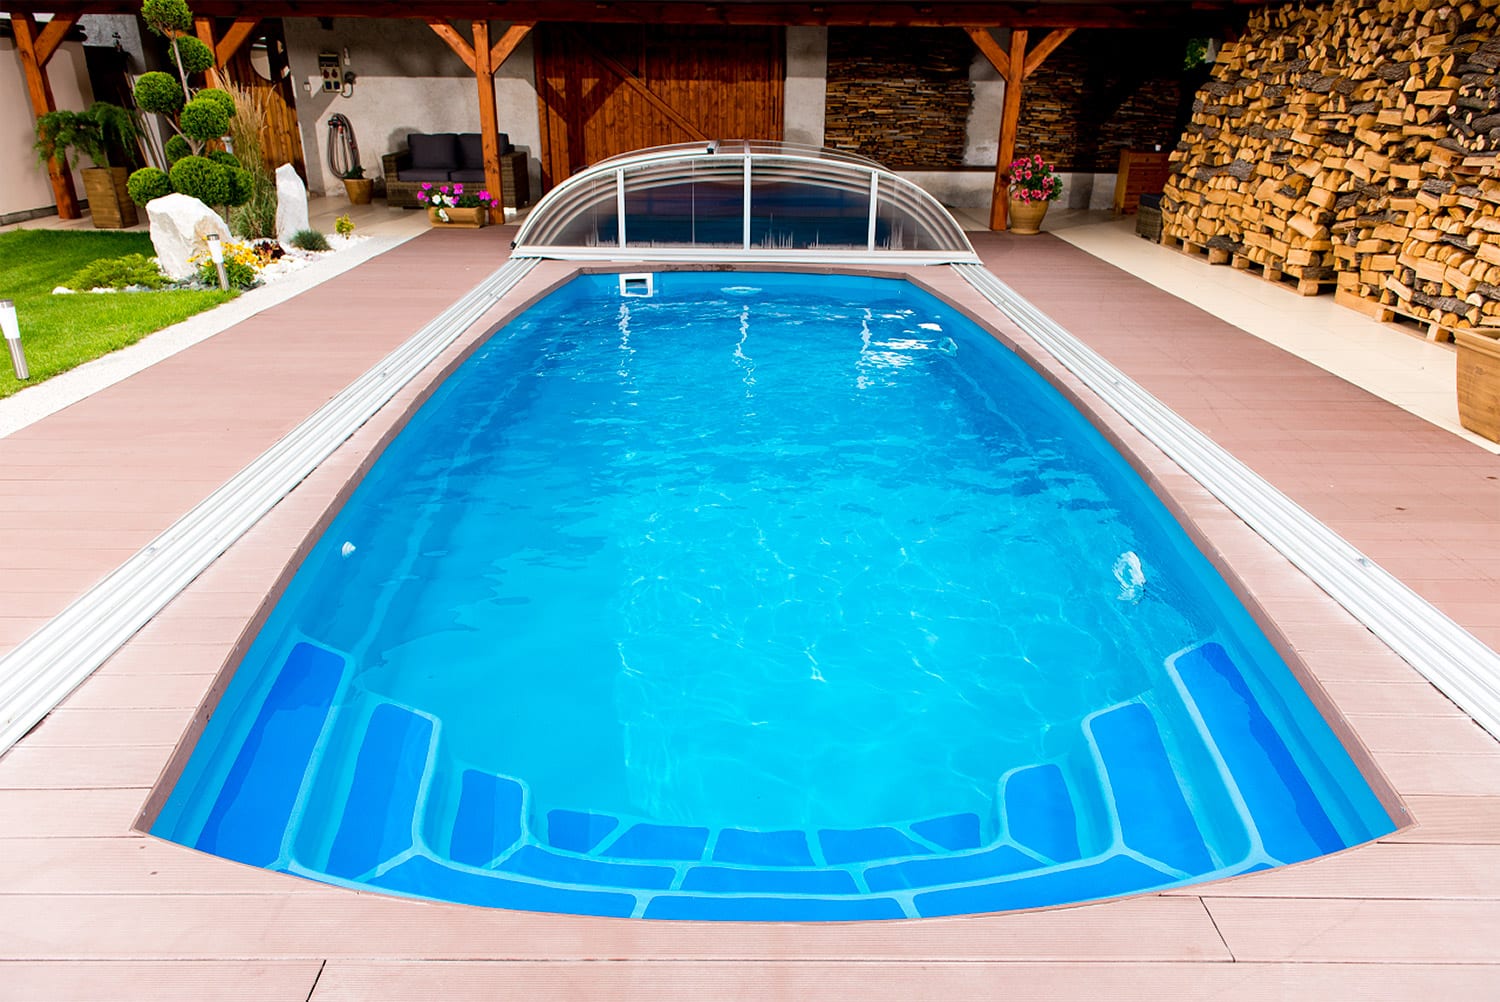 Coral ORION Glass-Composite Pool (7.5m x 3.5m x 1.5m)